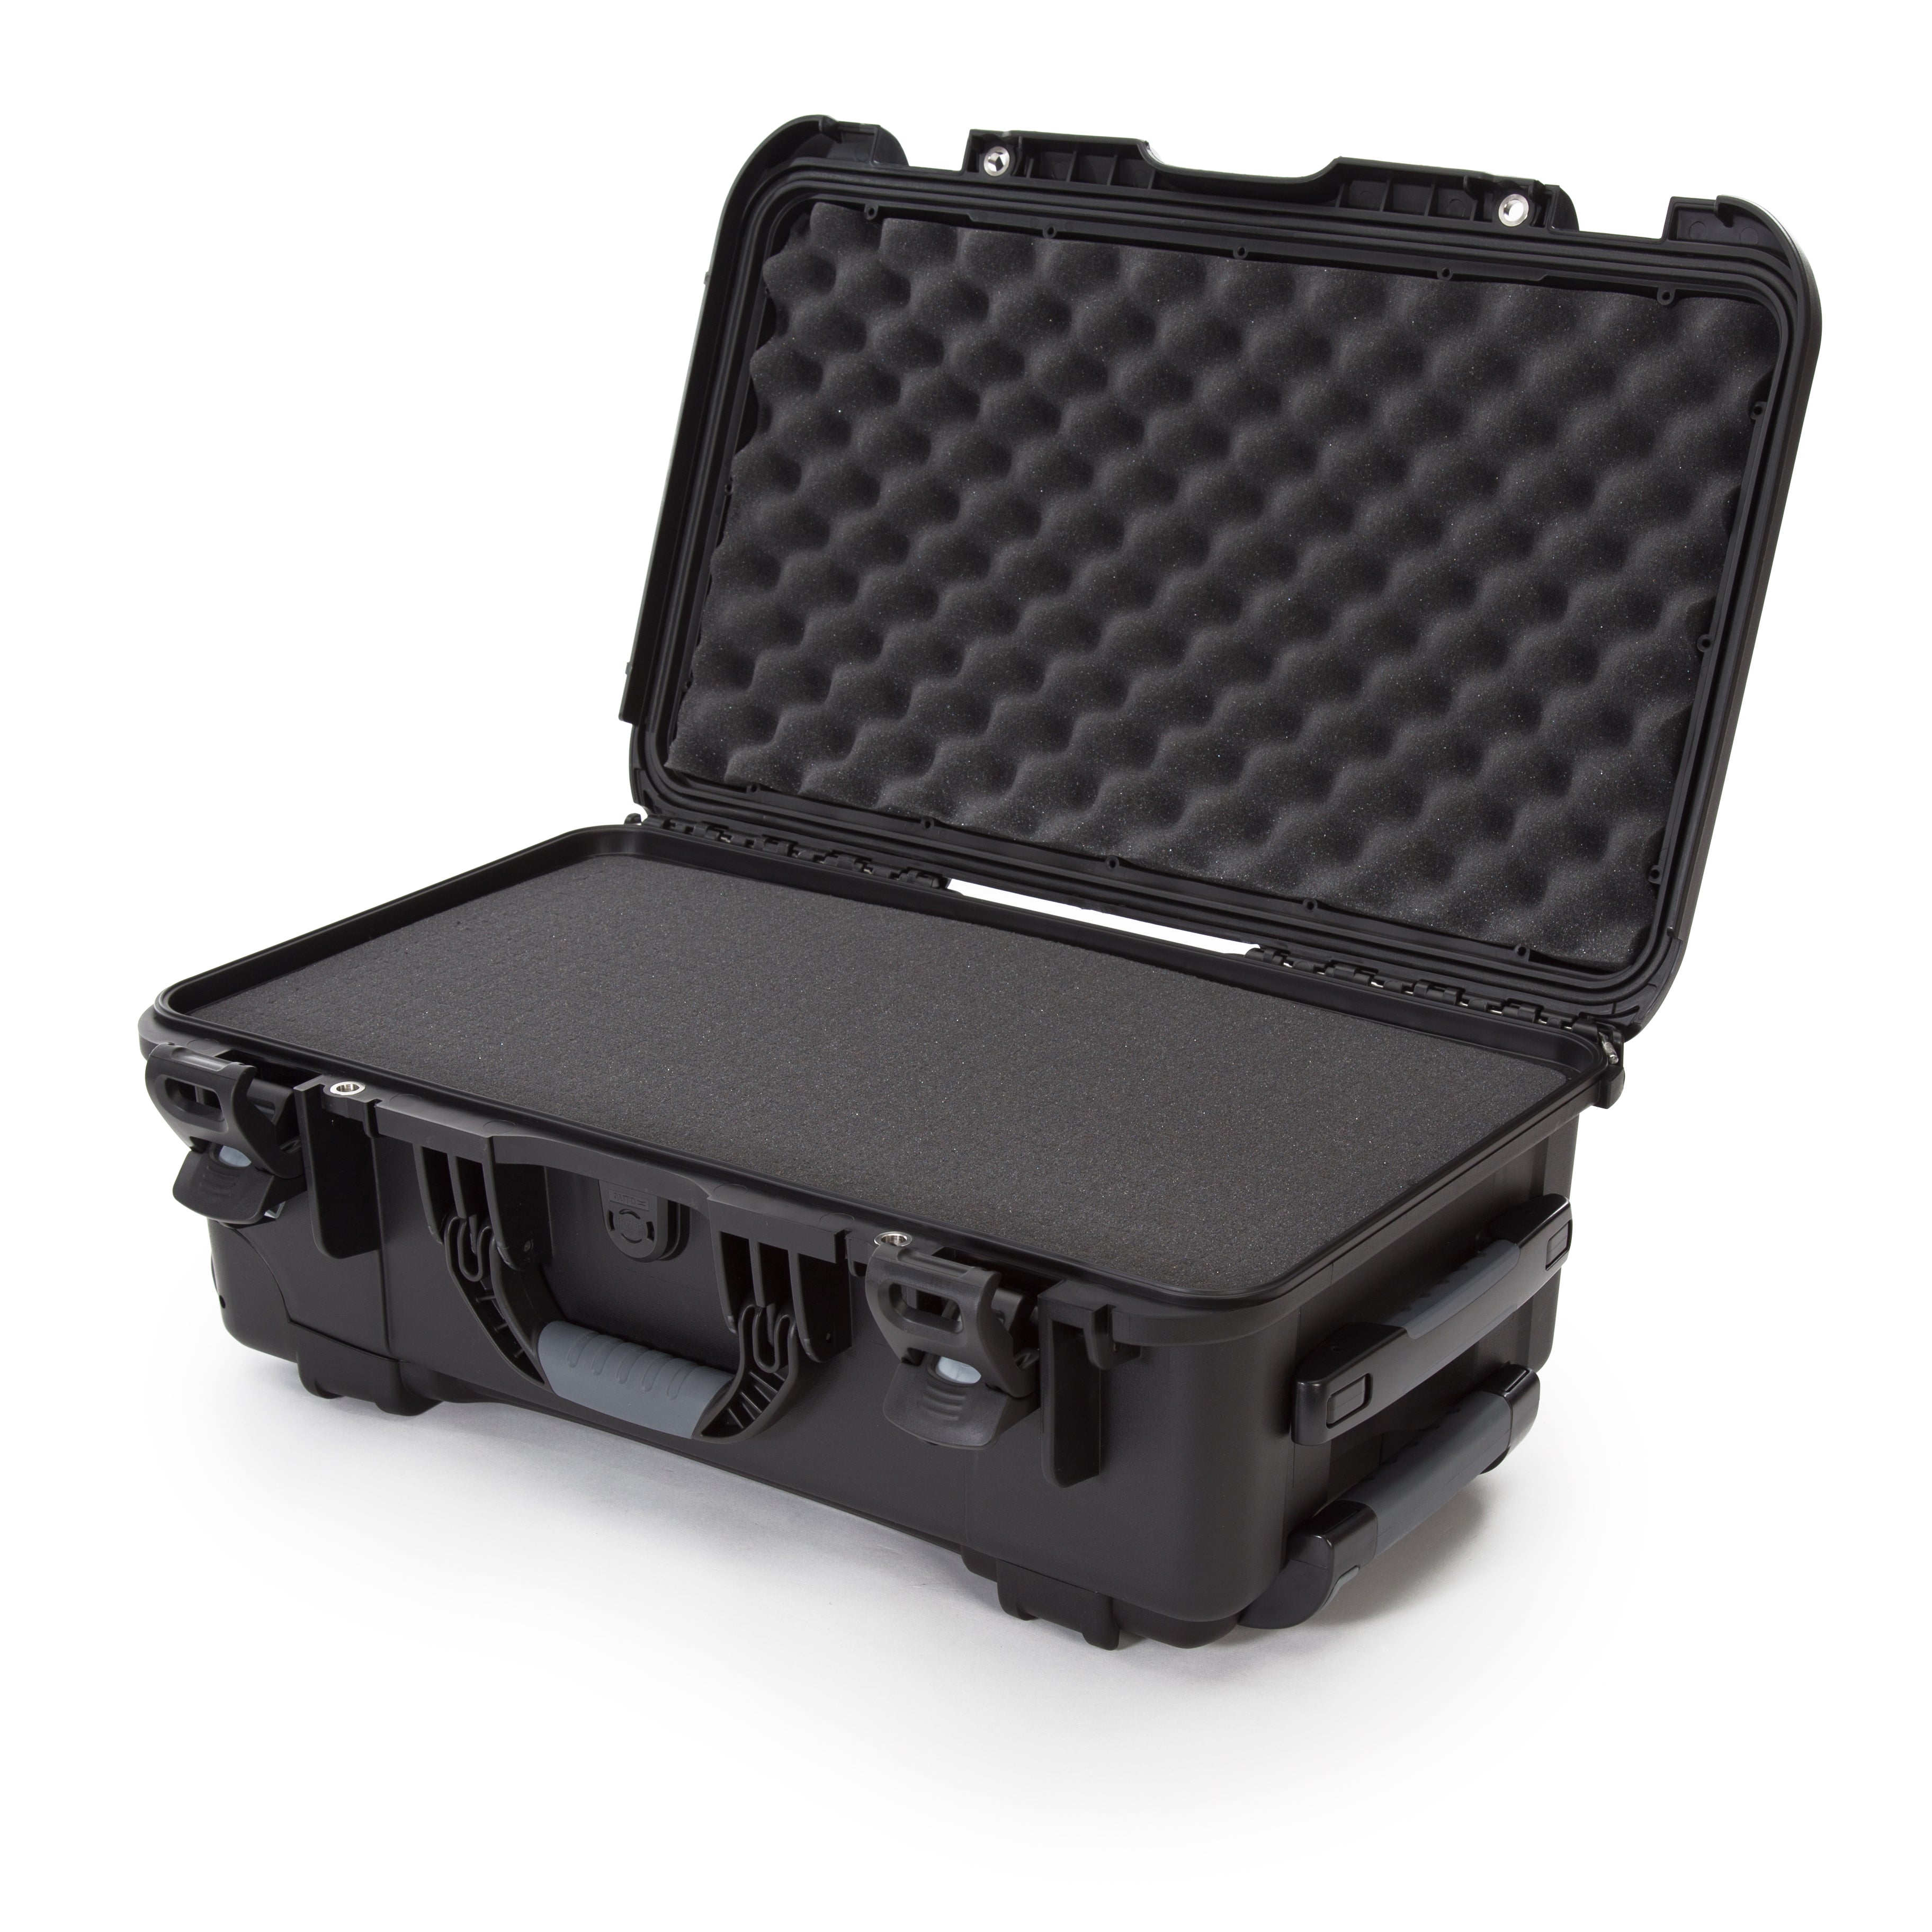 Nanuk R 935 Eco-Friendly Hard Case (Black, 28.5L, Foam Insert) with Made from Waterproof, Impact & Measures 22 x 14 x 9